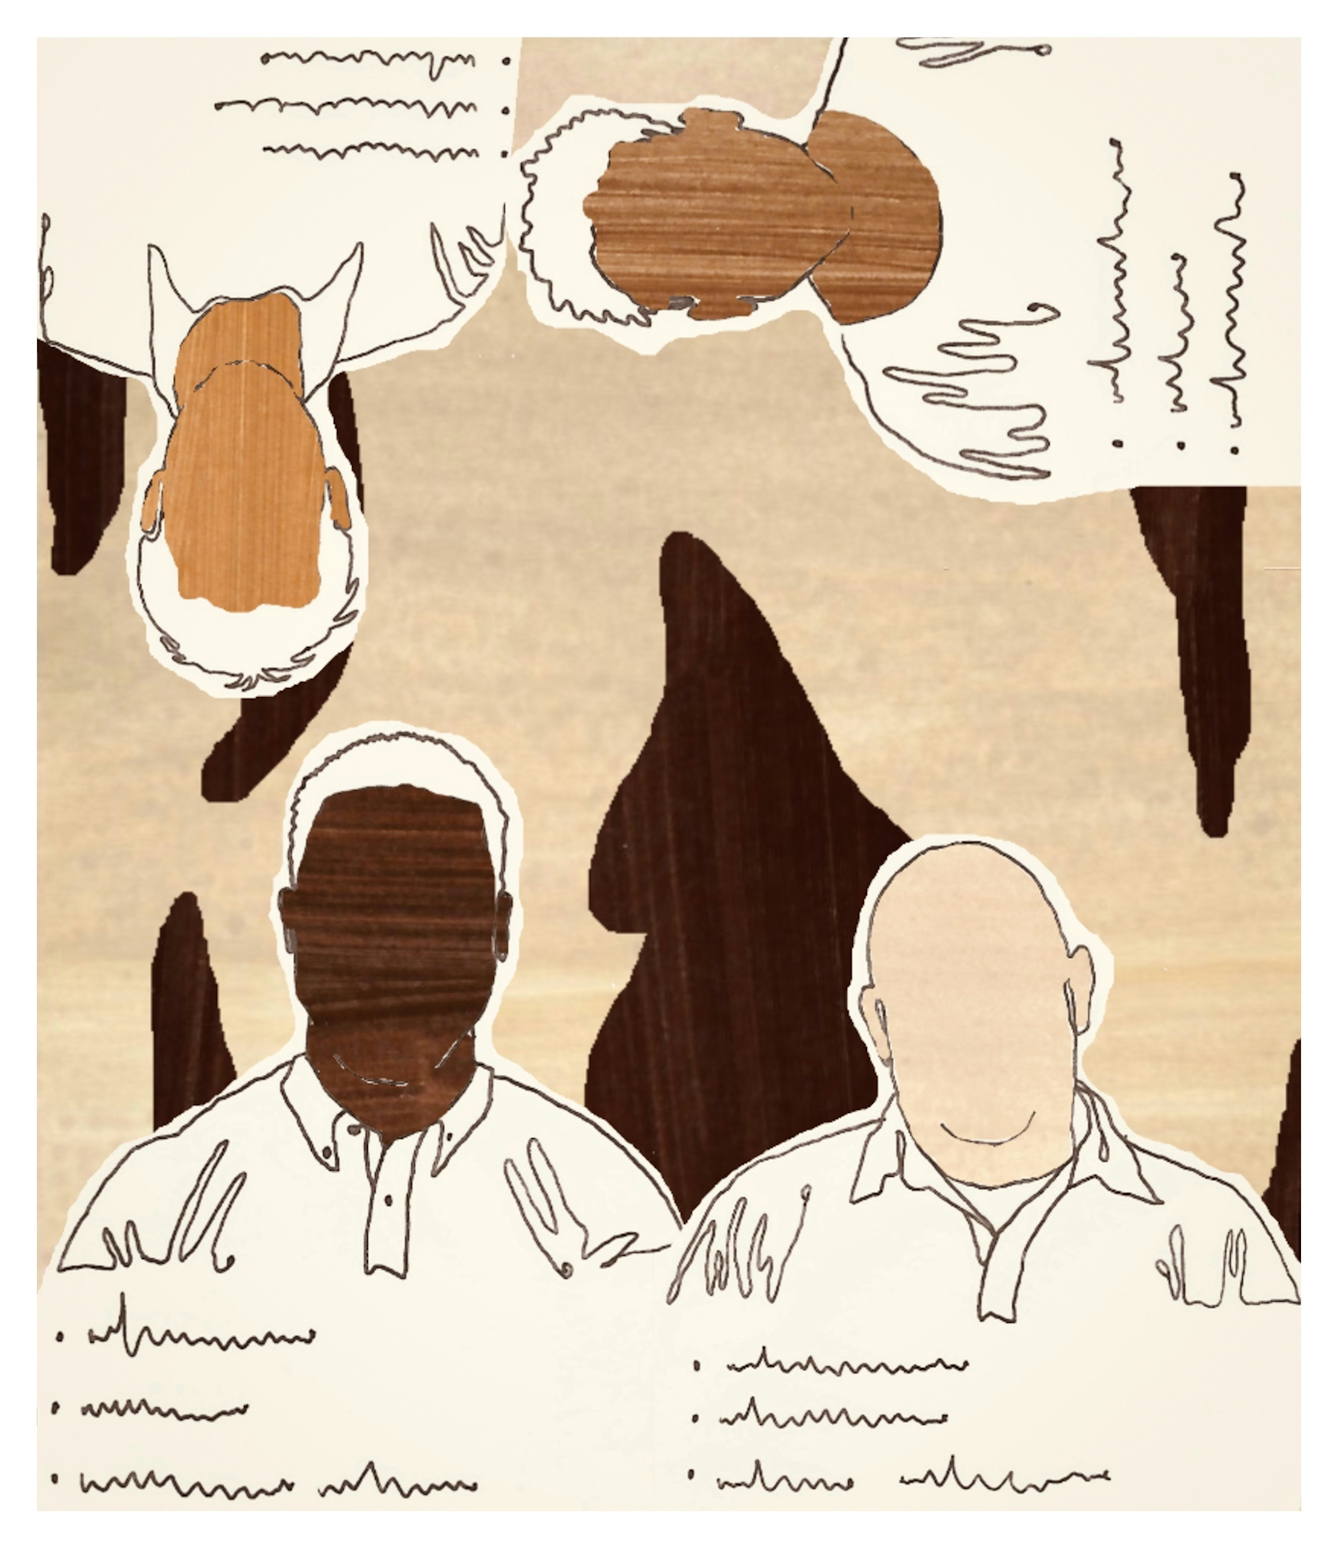 Digital artwork made up of collage elements, line drawing and textured patterns.The artwork depicts the outlines of 4 male figures with squiggly lines beneath them suggesting a bullet pointed list of text. Their faces have no features, but they are all different shapes and sizes and skin tones. 2 of the men are the right way up along the bottom edge of the frame. The other two are rotated against the right hand edge and top edge, upside-down.The tones of the artwork are creams, rusts and browns.